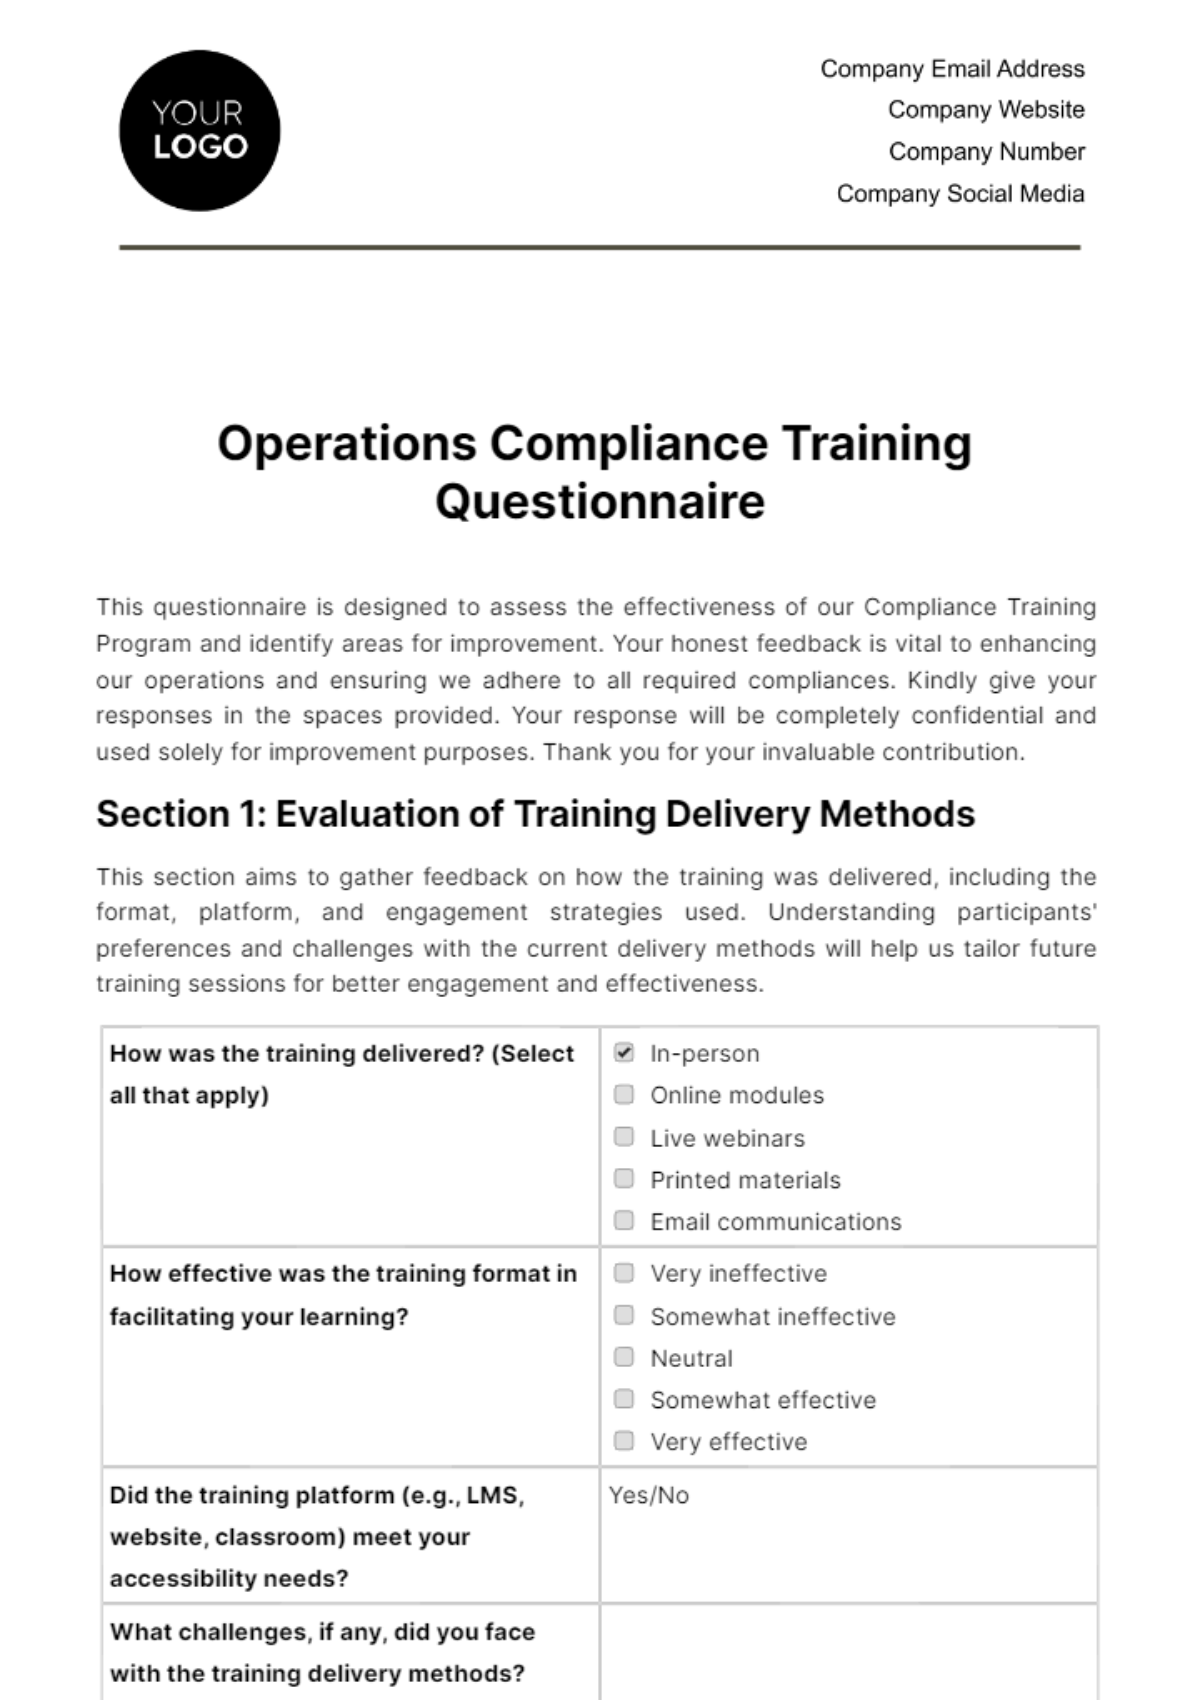 Operations Compliance Training Questionnaire Template